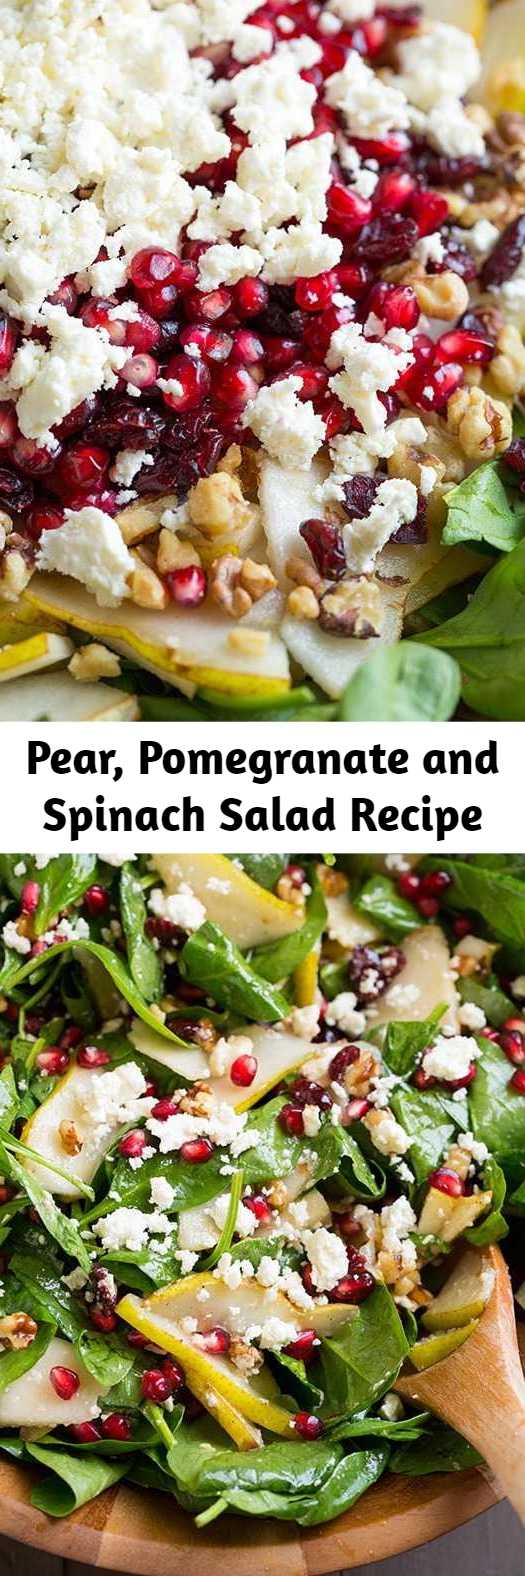 Pear, Pomegranate and Spinach Salad Recipe - This colorful salad is brimming with fresh flavor it's it's perfect for the holidays. I love how festive the arils look in this salad when paired with the greens, and of course I’m in love with the entire flavor combination of this salad!